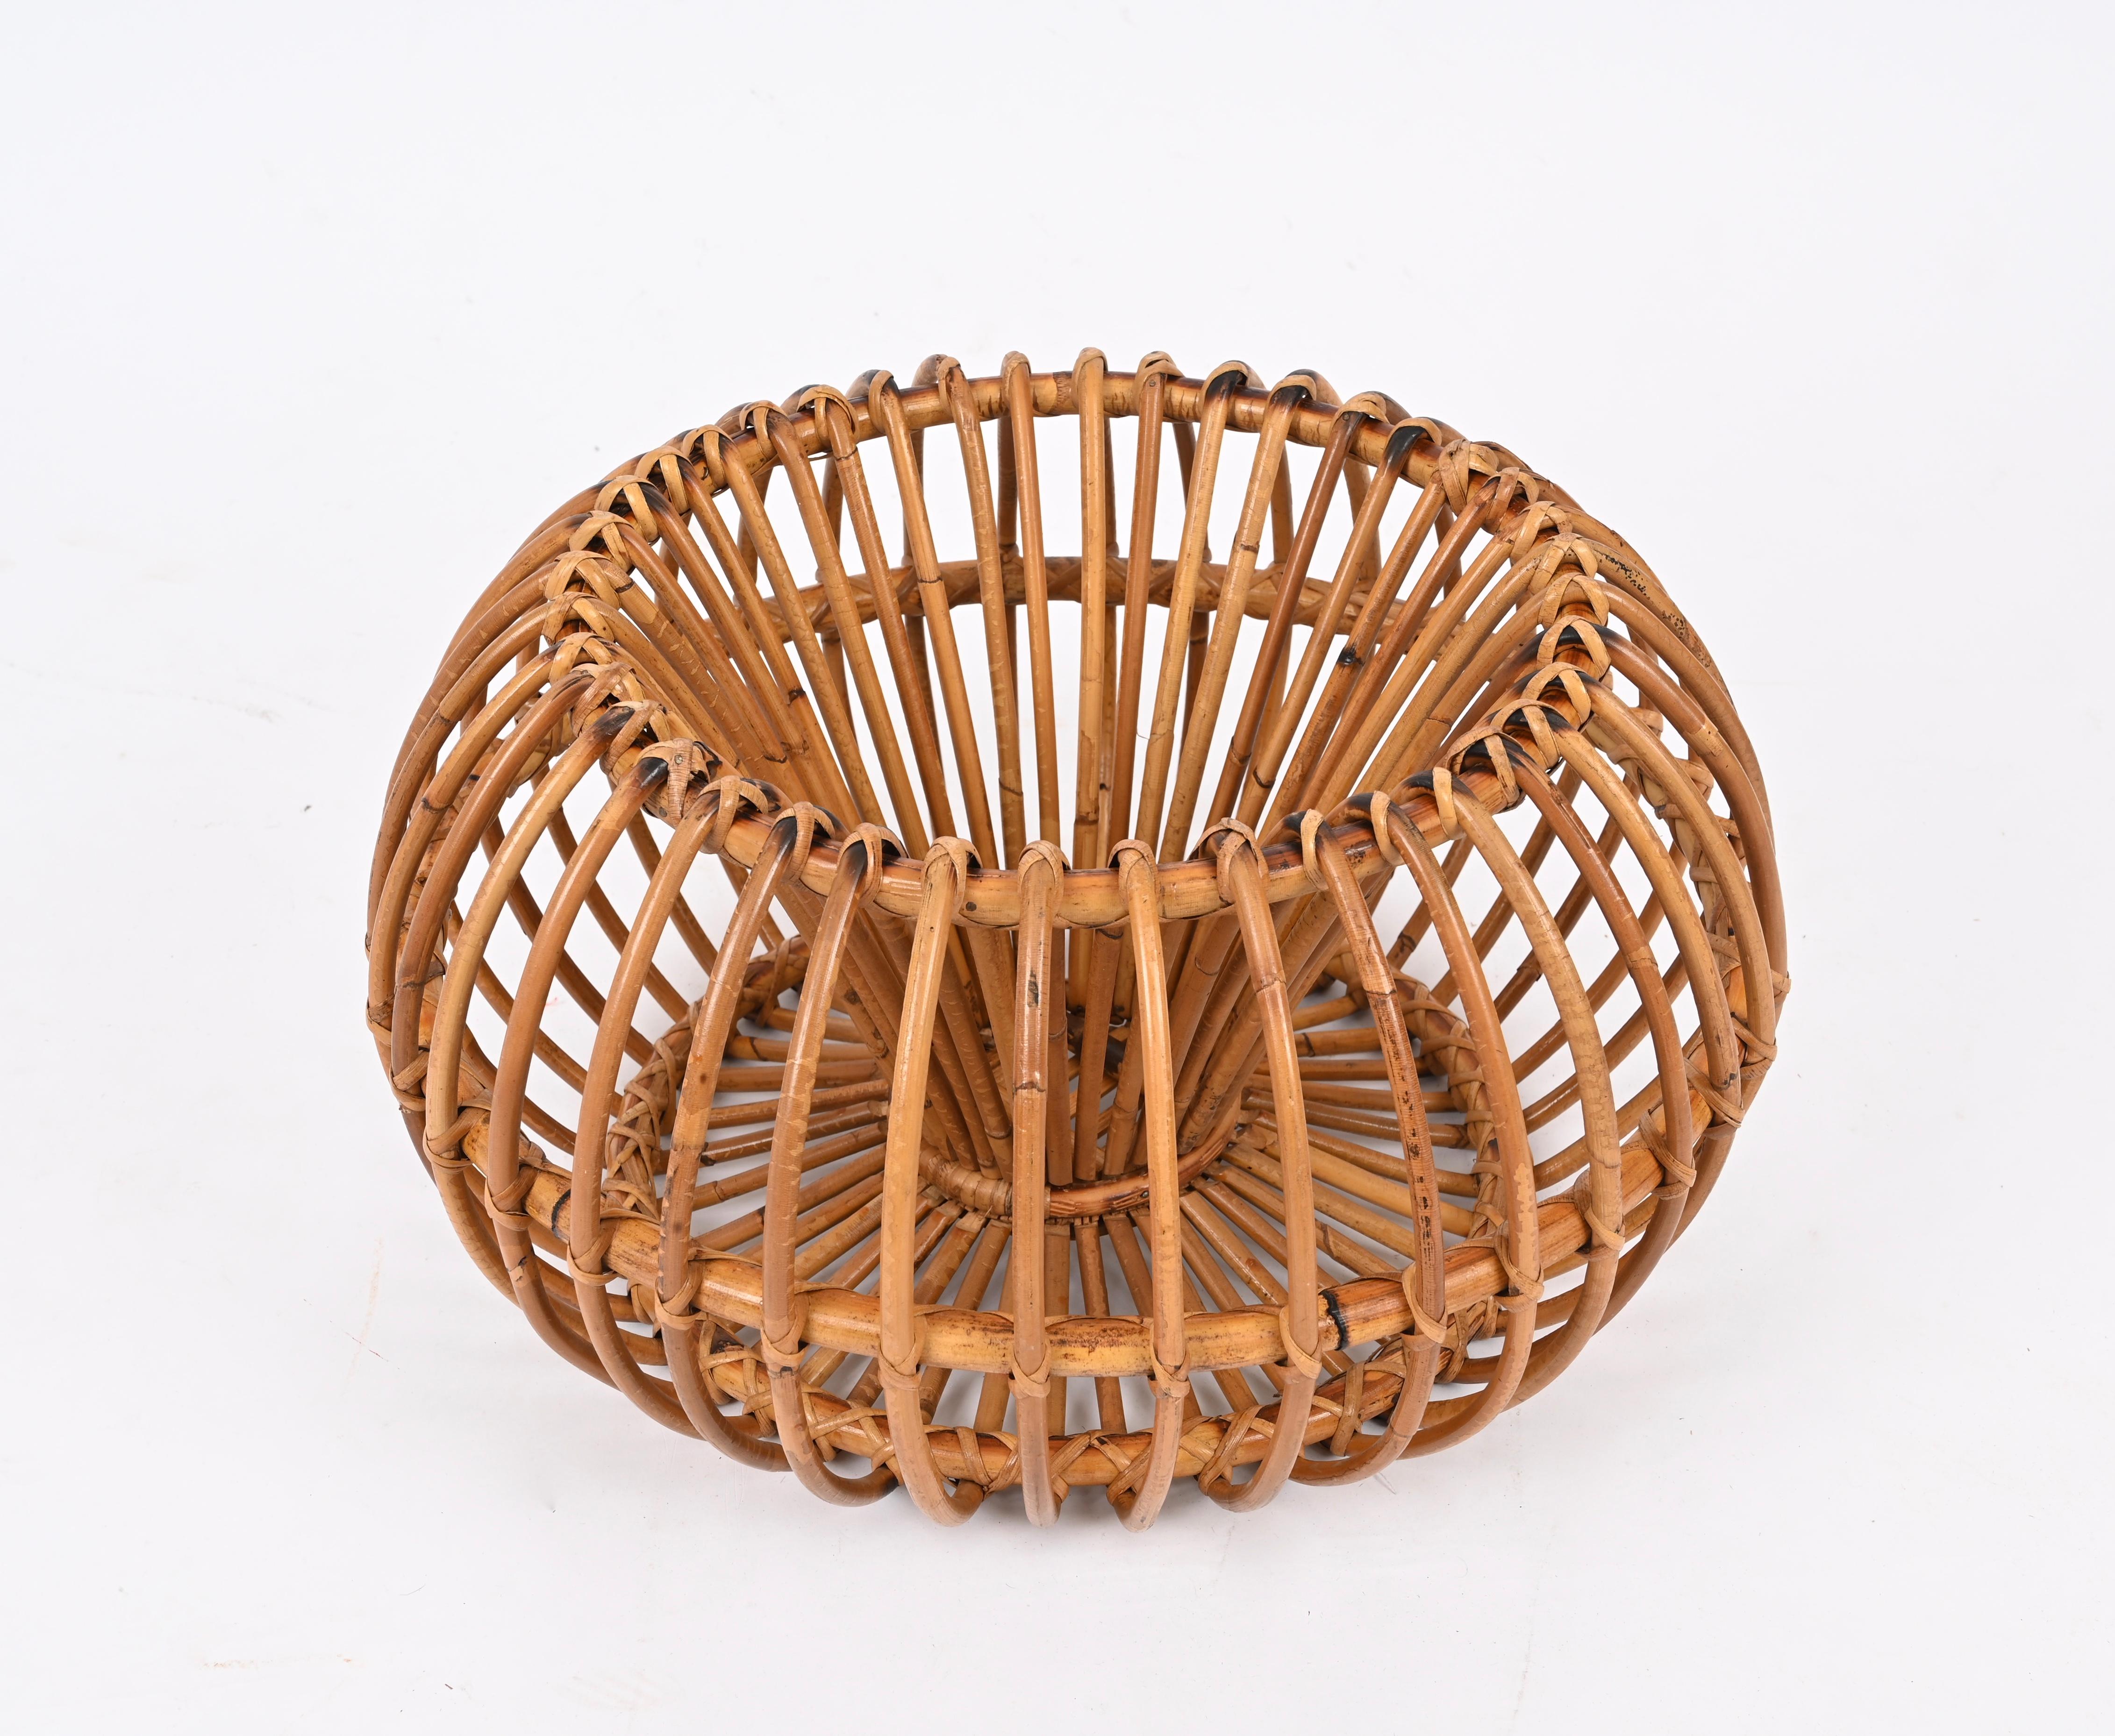 Living Room Rattan Set by Janine Abraham & Dirk Jan Rol - Chairs, Pouf, Mirror  For Sale 8